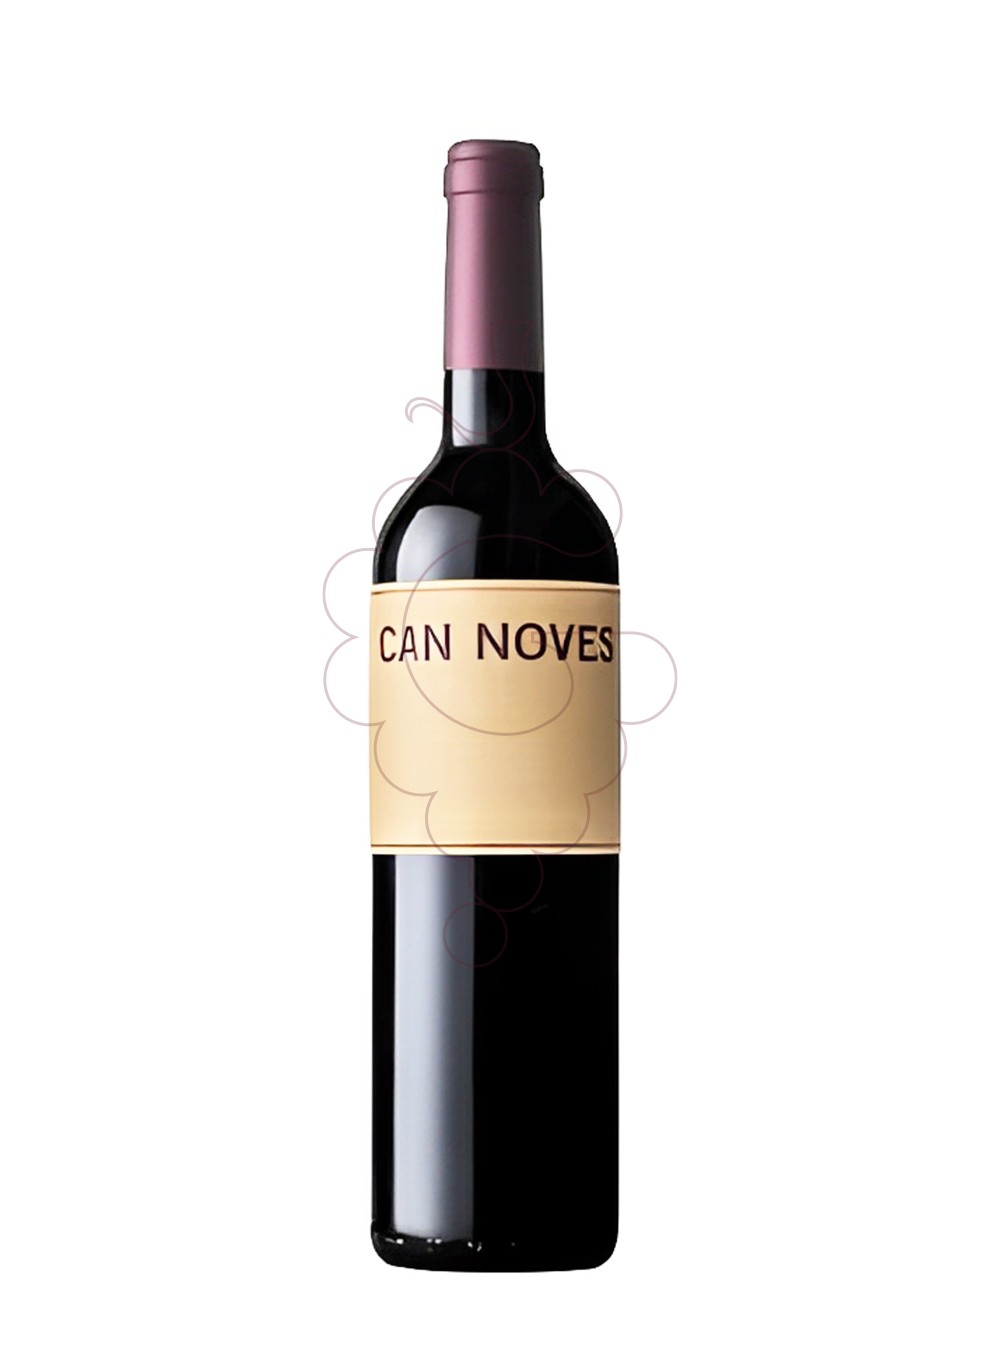 Photo Can noves 2018 75 cl red wine